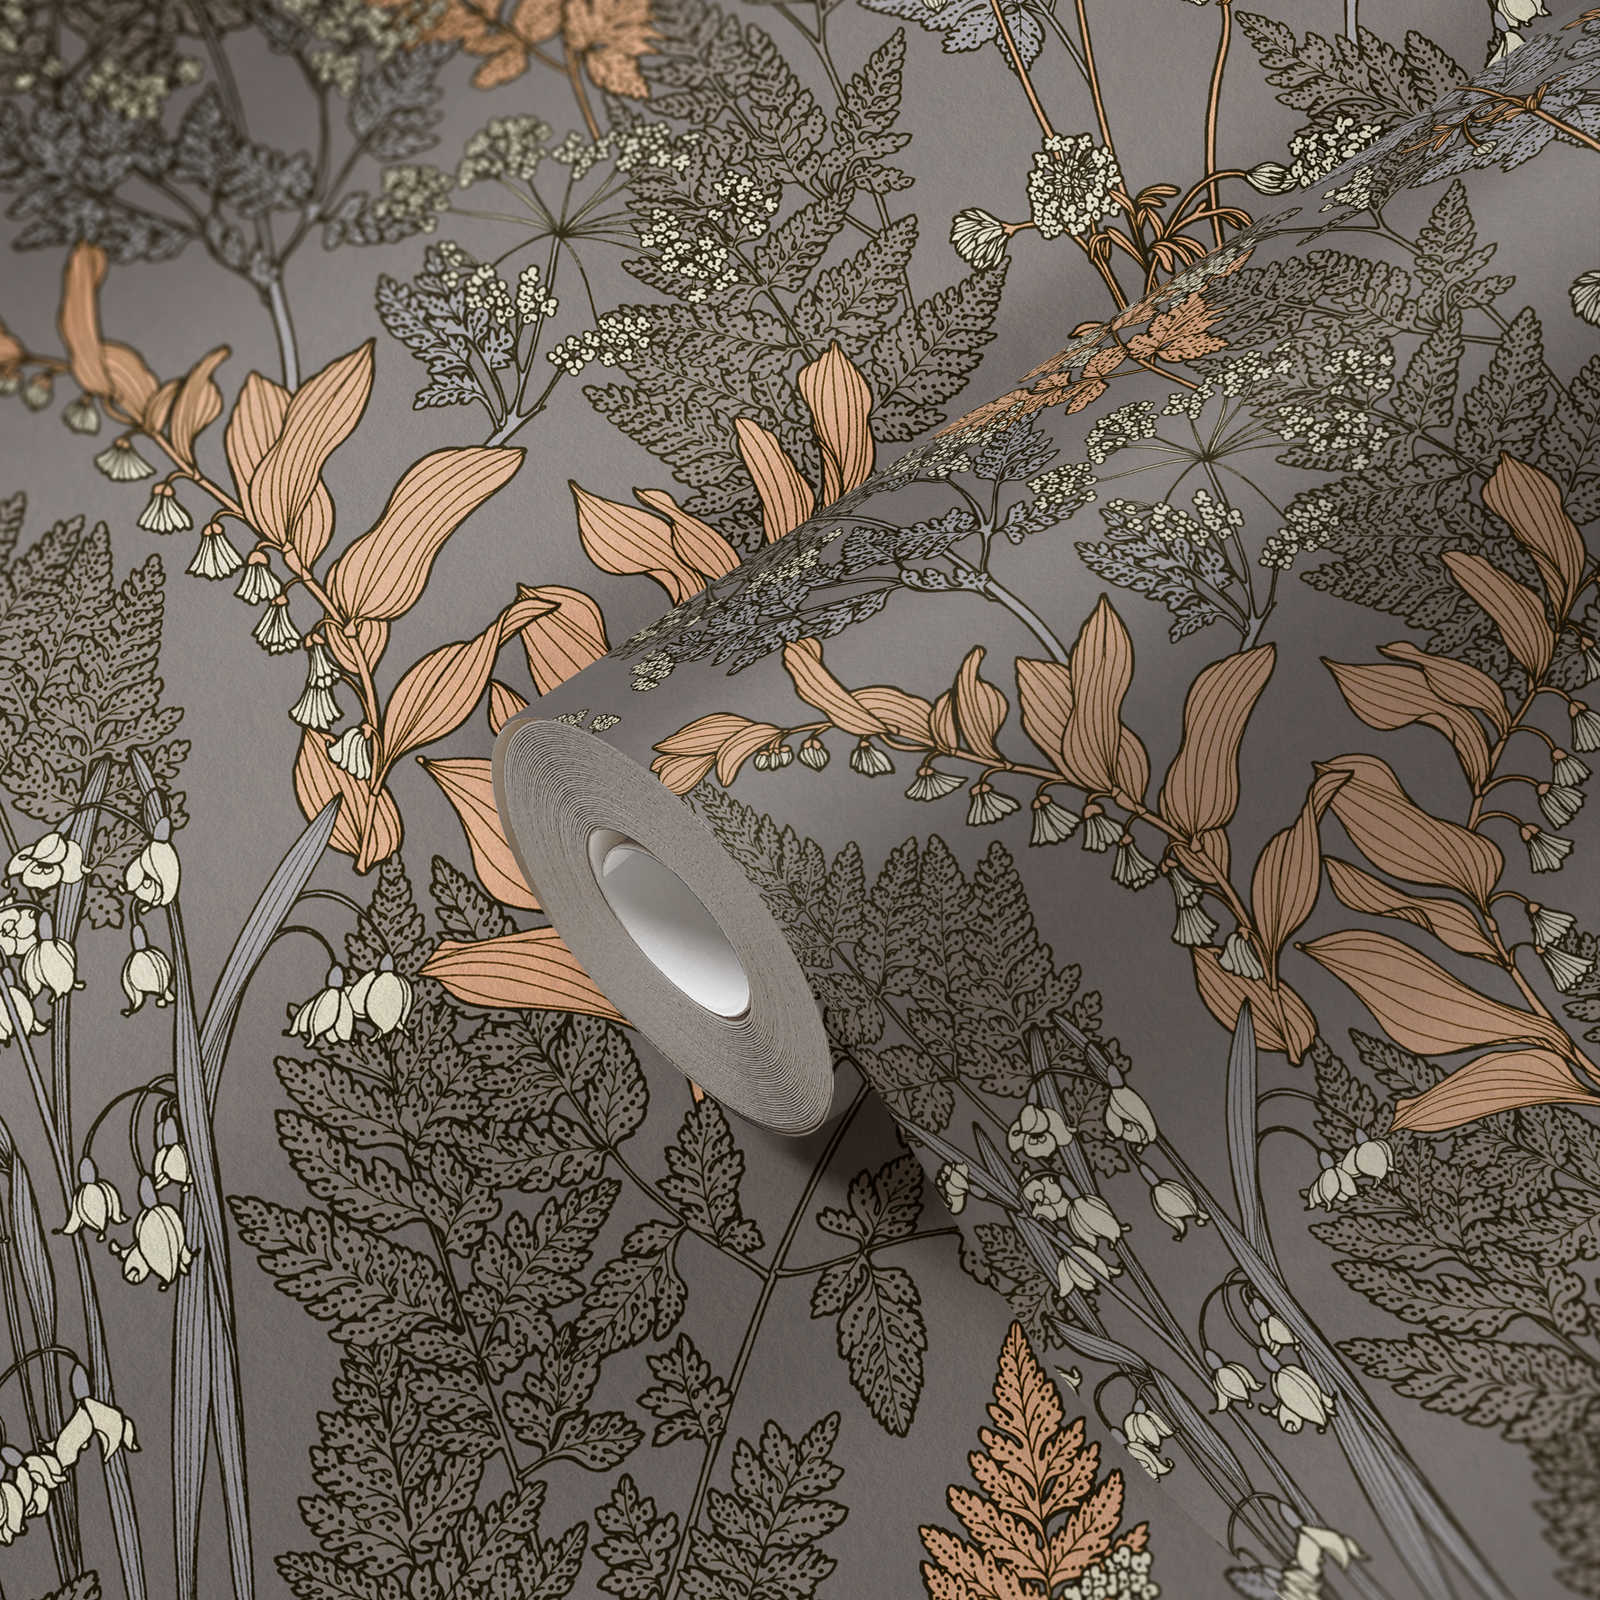             Wallpaper taupe with flowers design in modern style - grey, beige, yellow
        